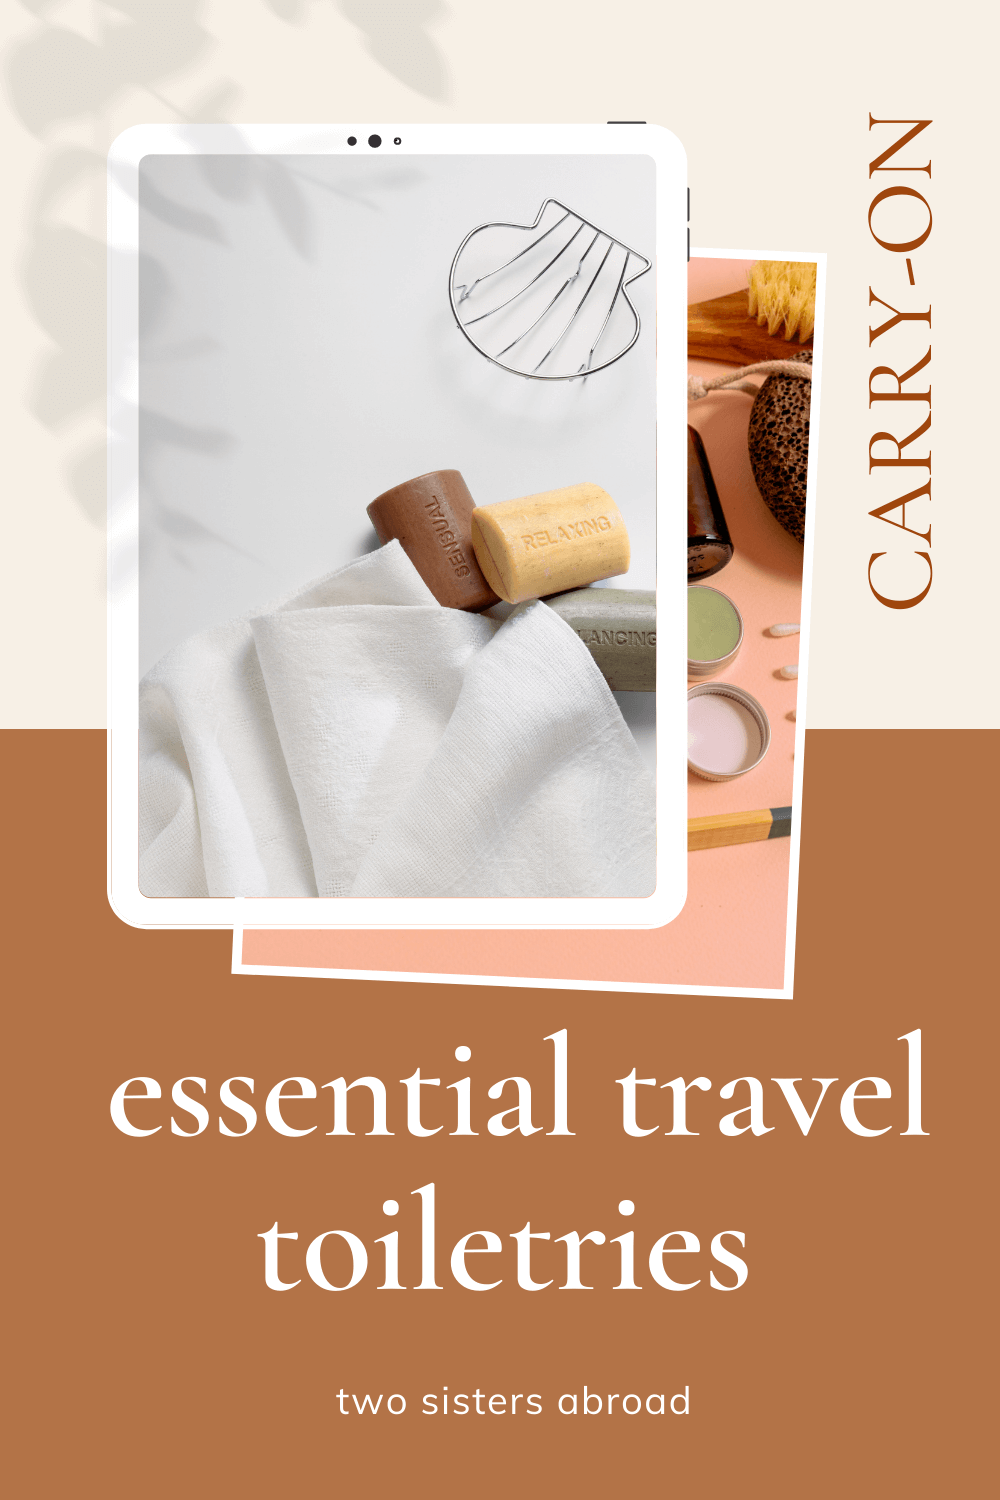 12 Road Trip Toiletries: Simple And Easy Travel Tips And Ideas